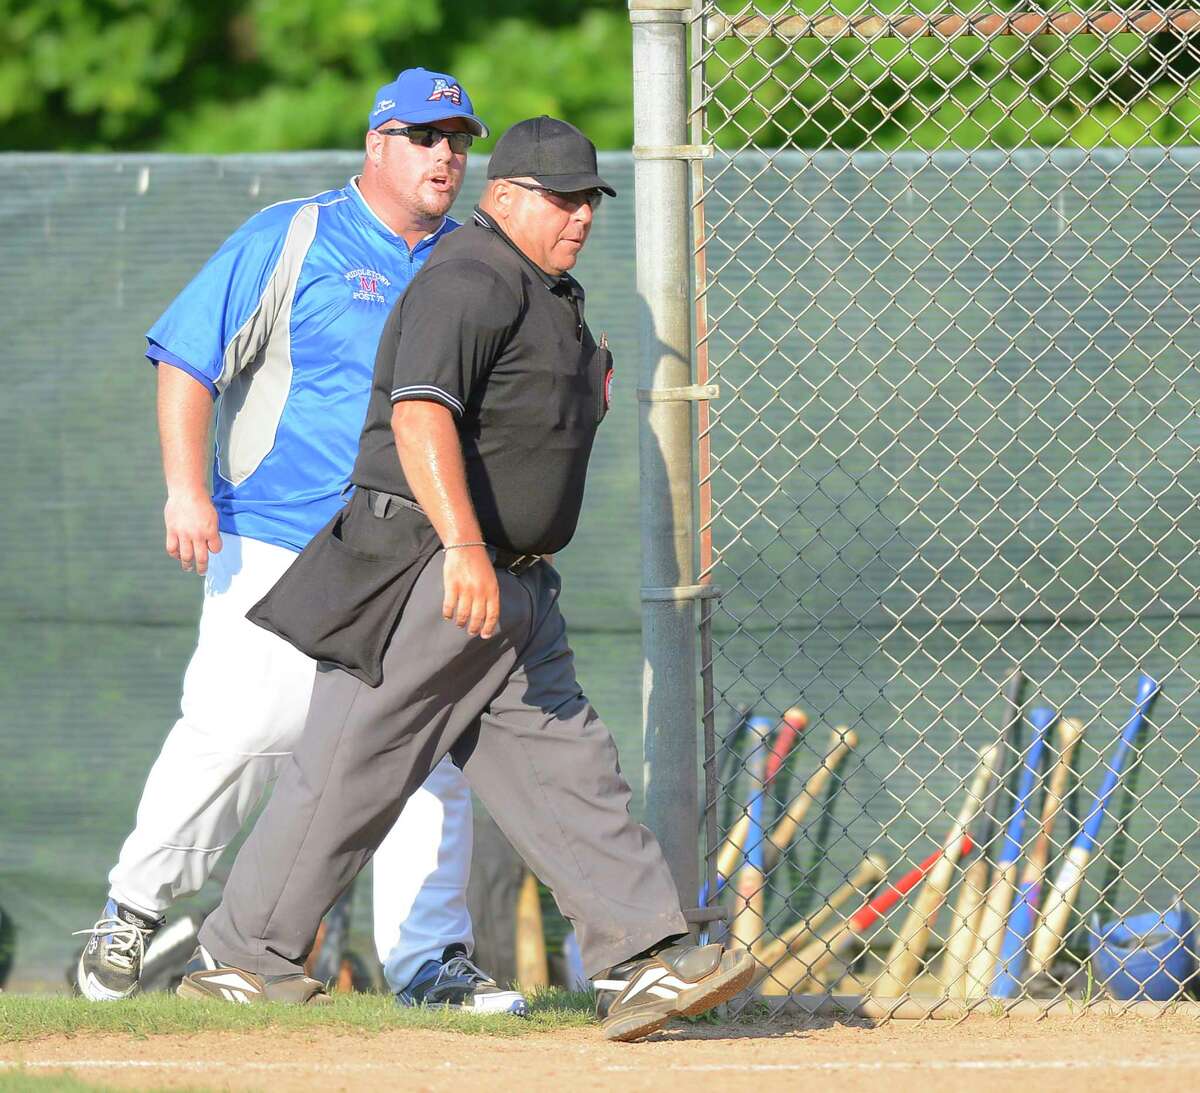 Middletown Coach Tim D’Aquila gives Umpire Pete Stokes an ear full after Stokes ejected him in the bottom of the second inning of a Senior American Legion State Tournament at Greenwich High School on Thursday July 18, 2017 in Greenwich, Connecticut. Greenwich defeated Middletown 8-1.